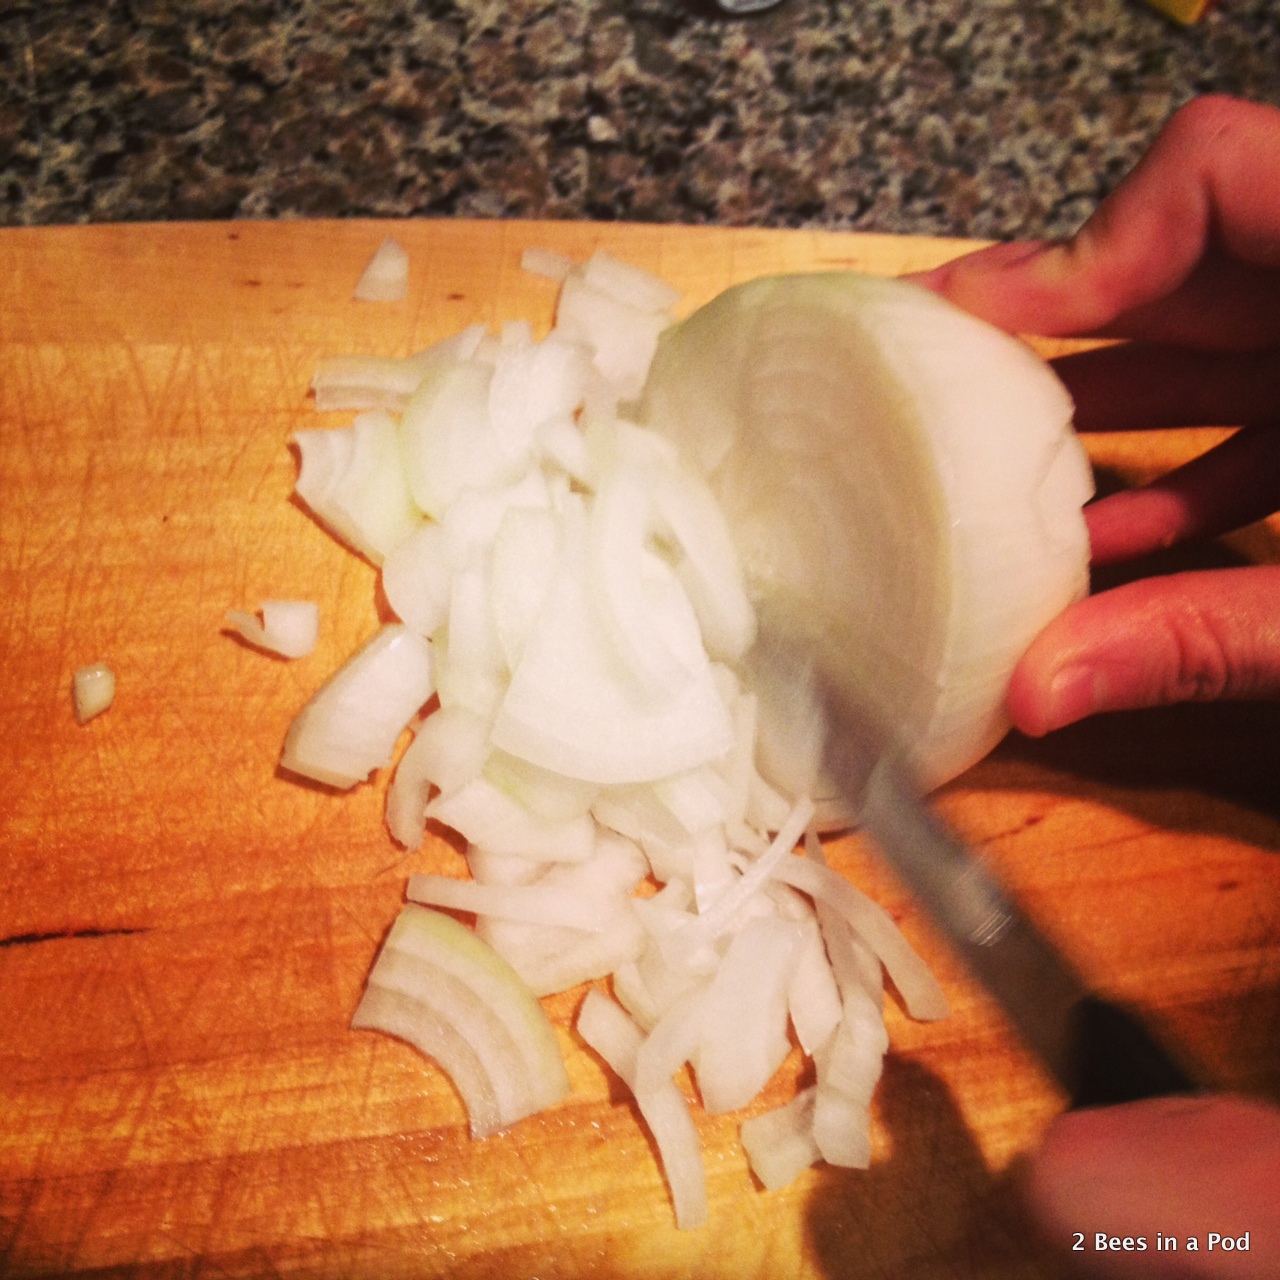 1-Chopping onions for homemade chili.